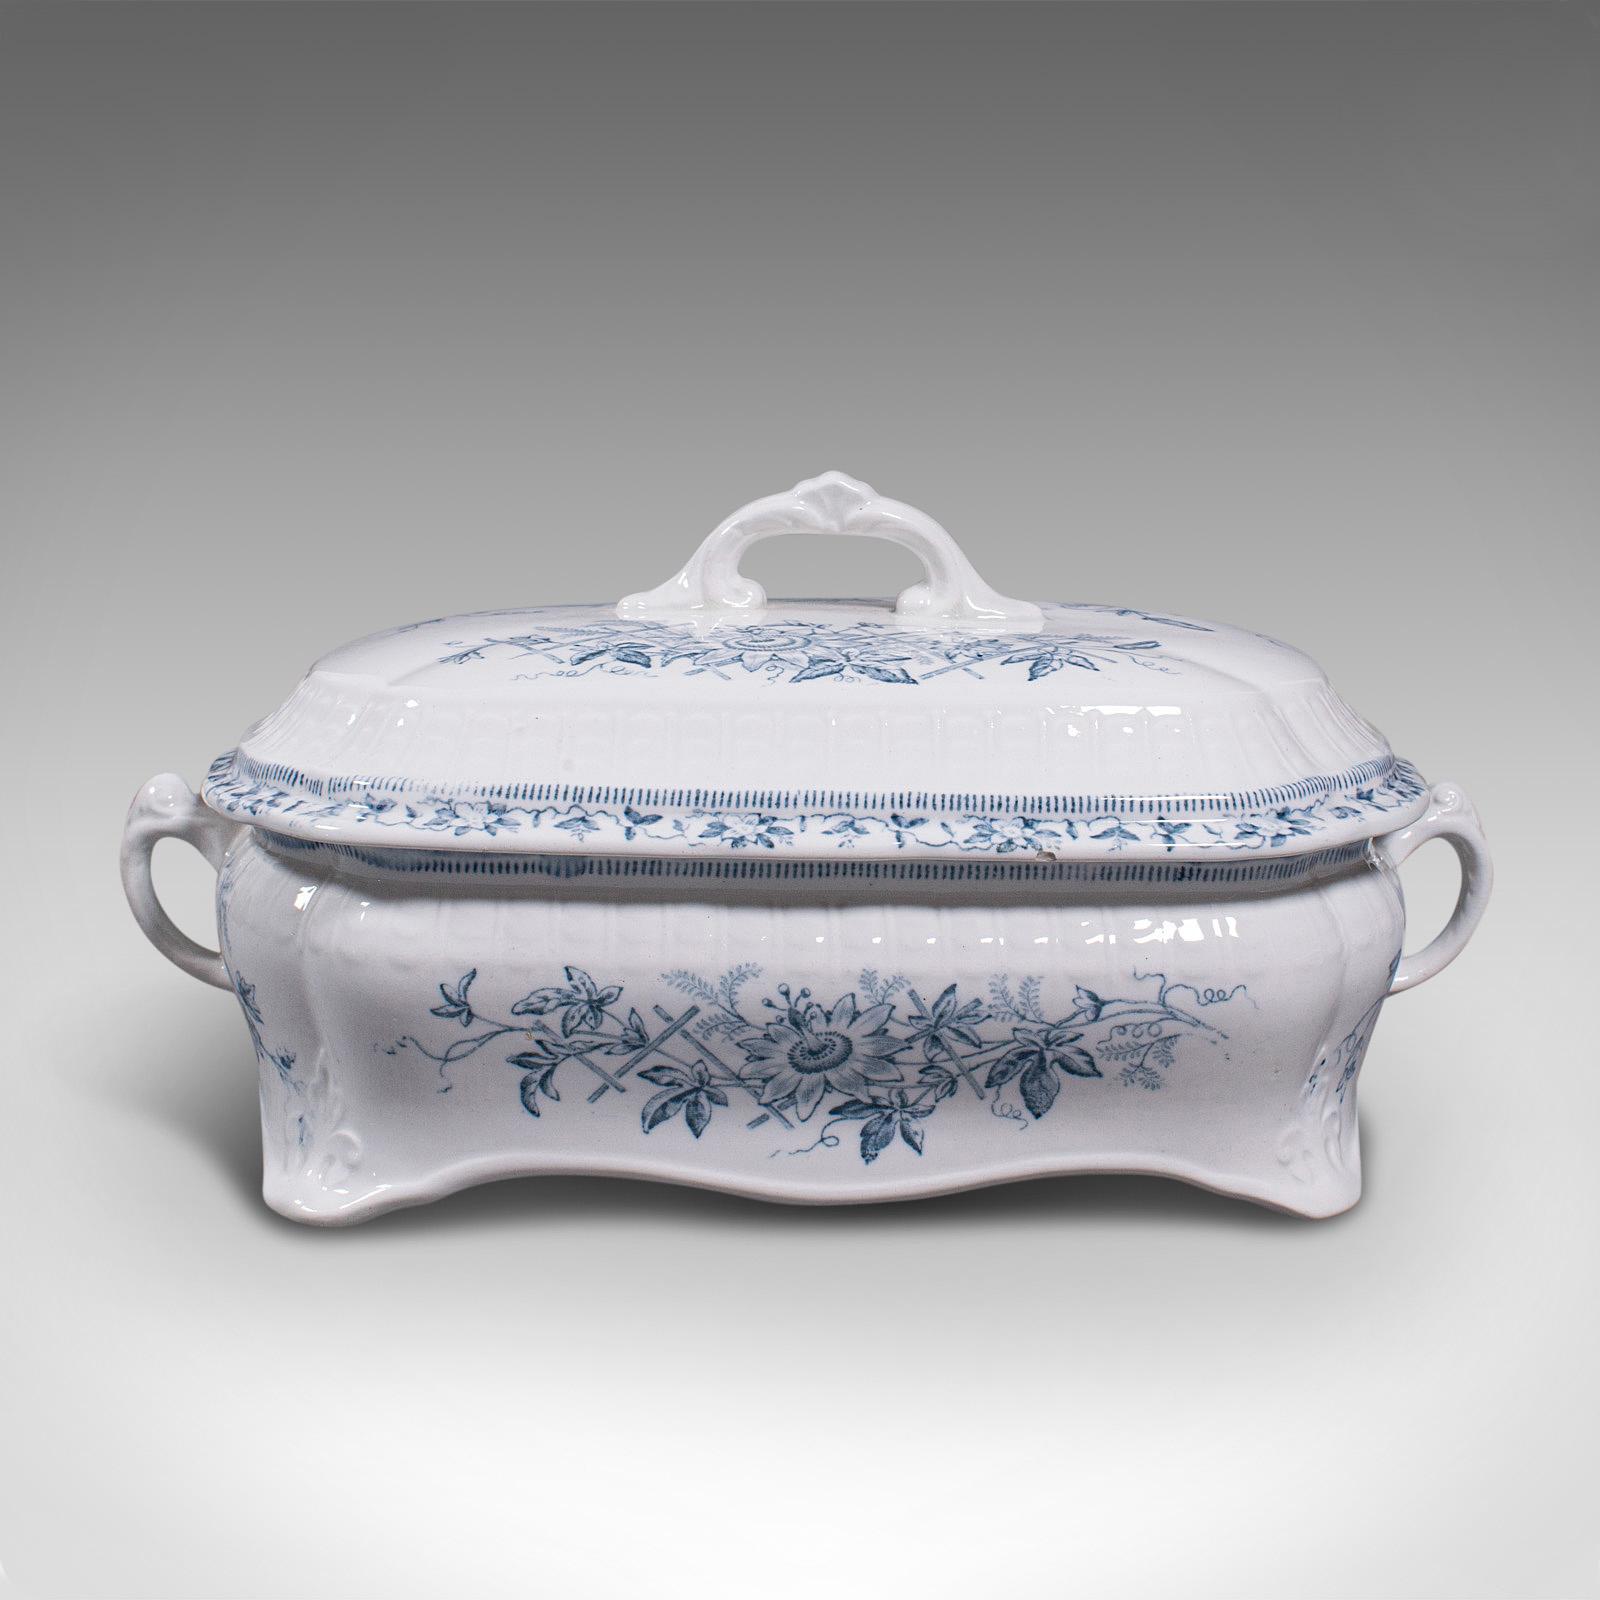 19th Century Pair of Antique Serving Tureens, English, Ceramic, Lidded Dish, Victorian, 1900 For Sale